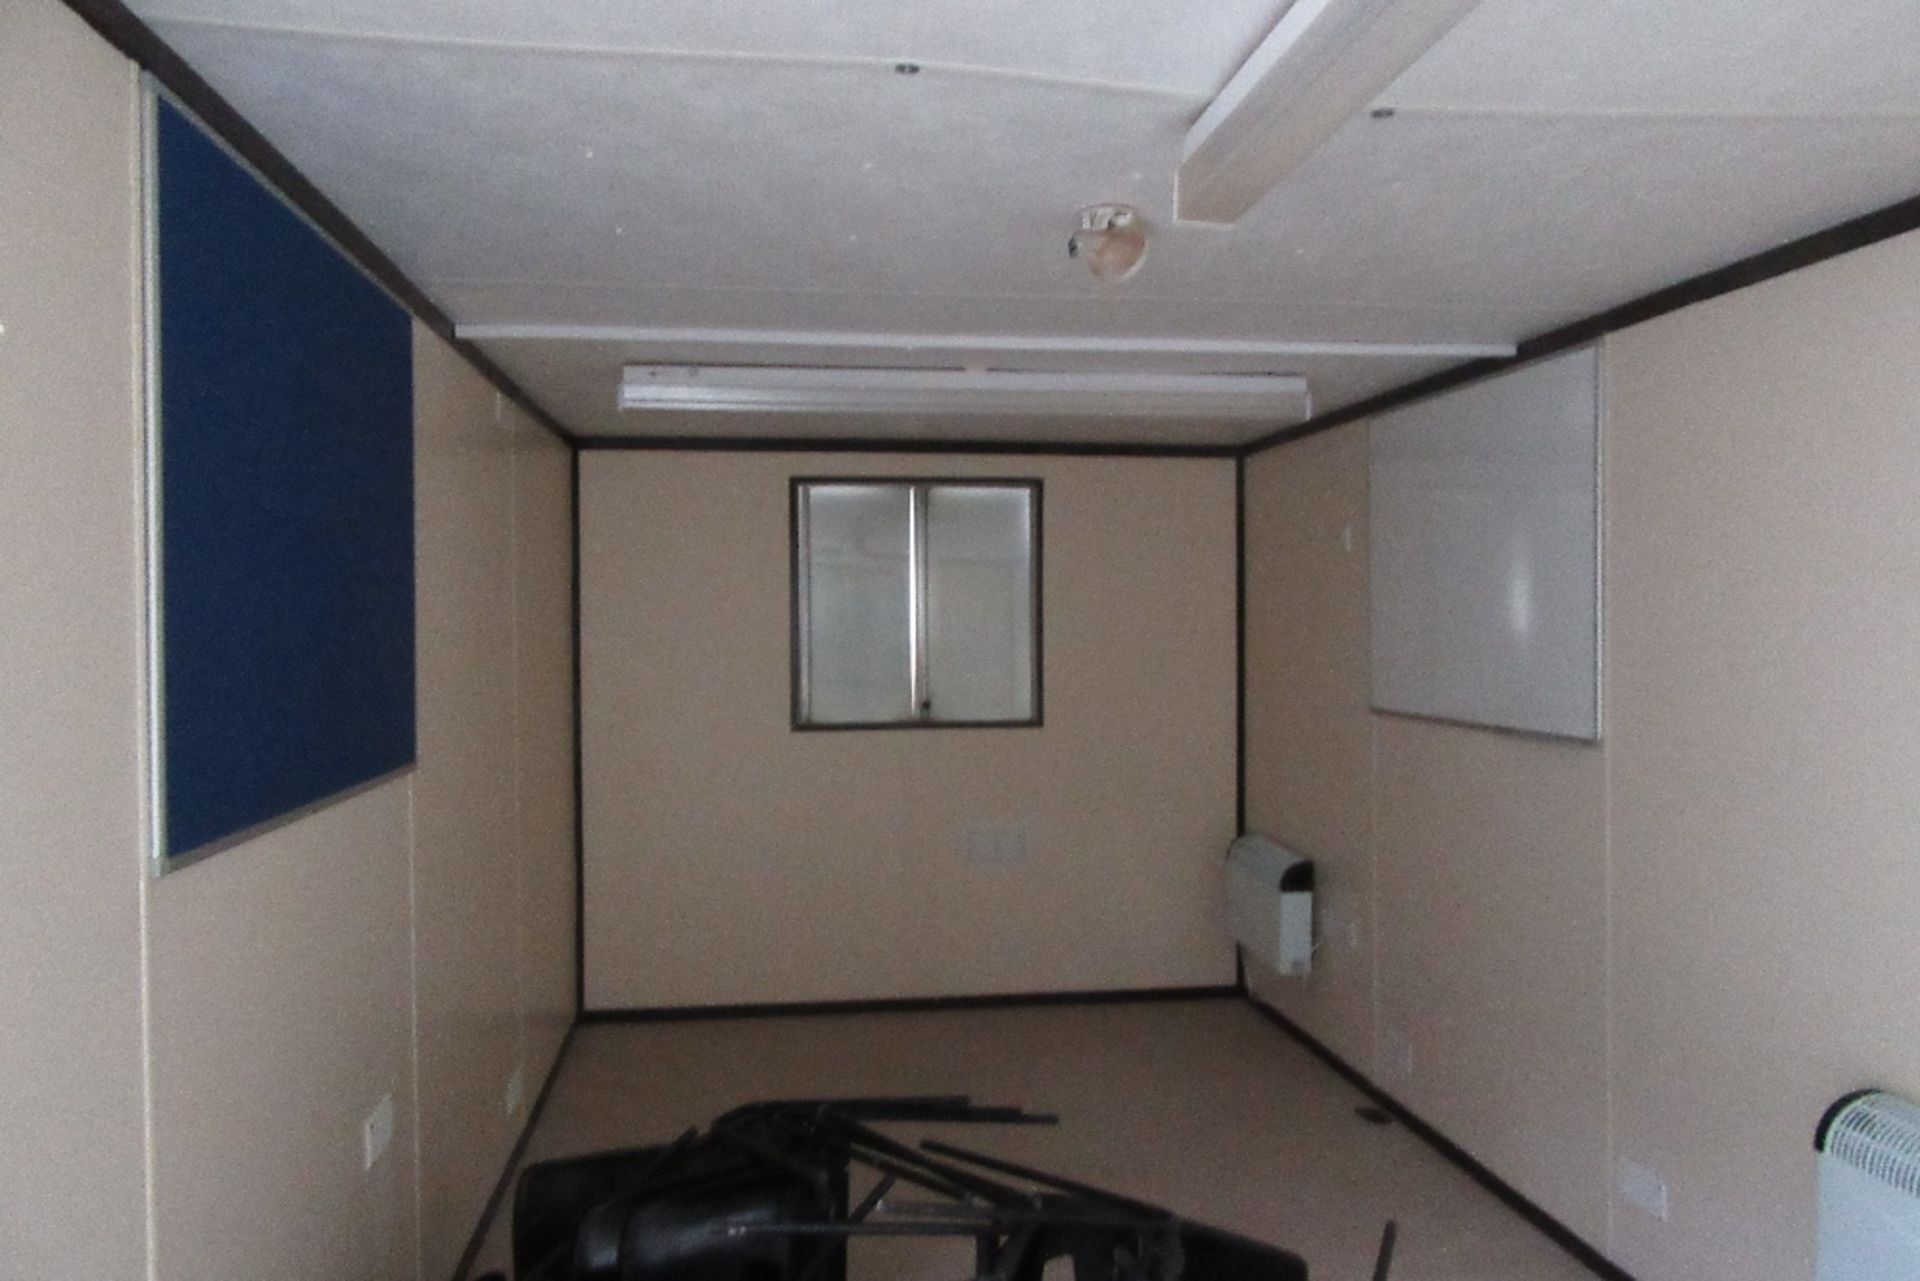 A449446 21ft x 8ft Anti Vandal Office - Image 6 of 7